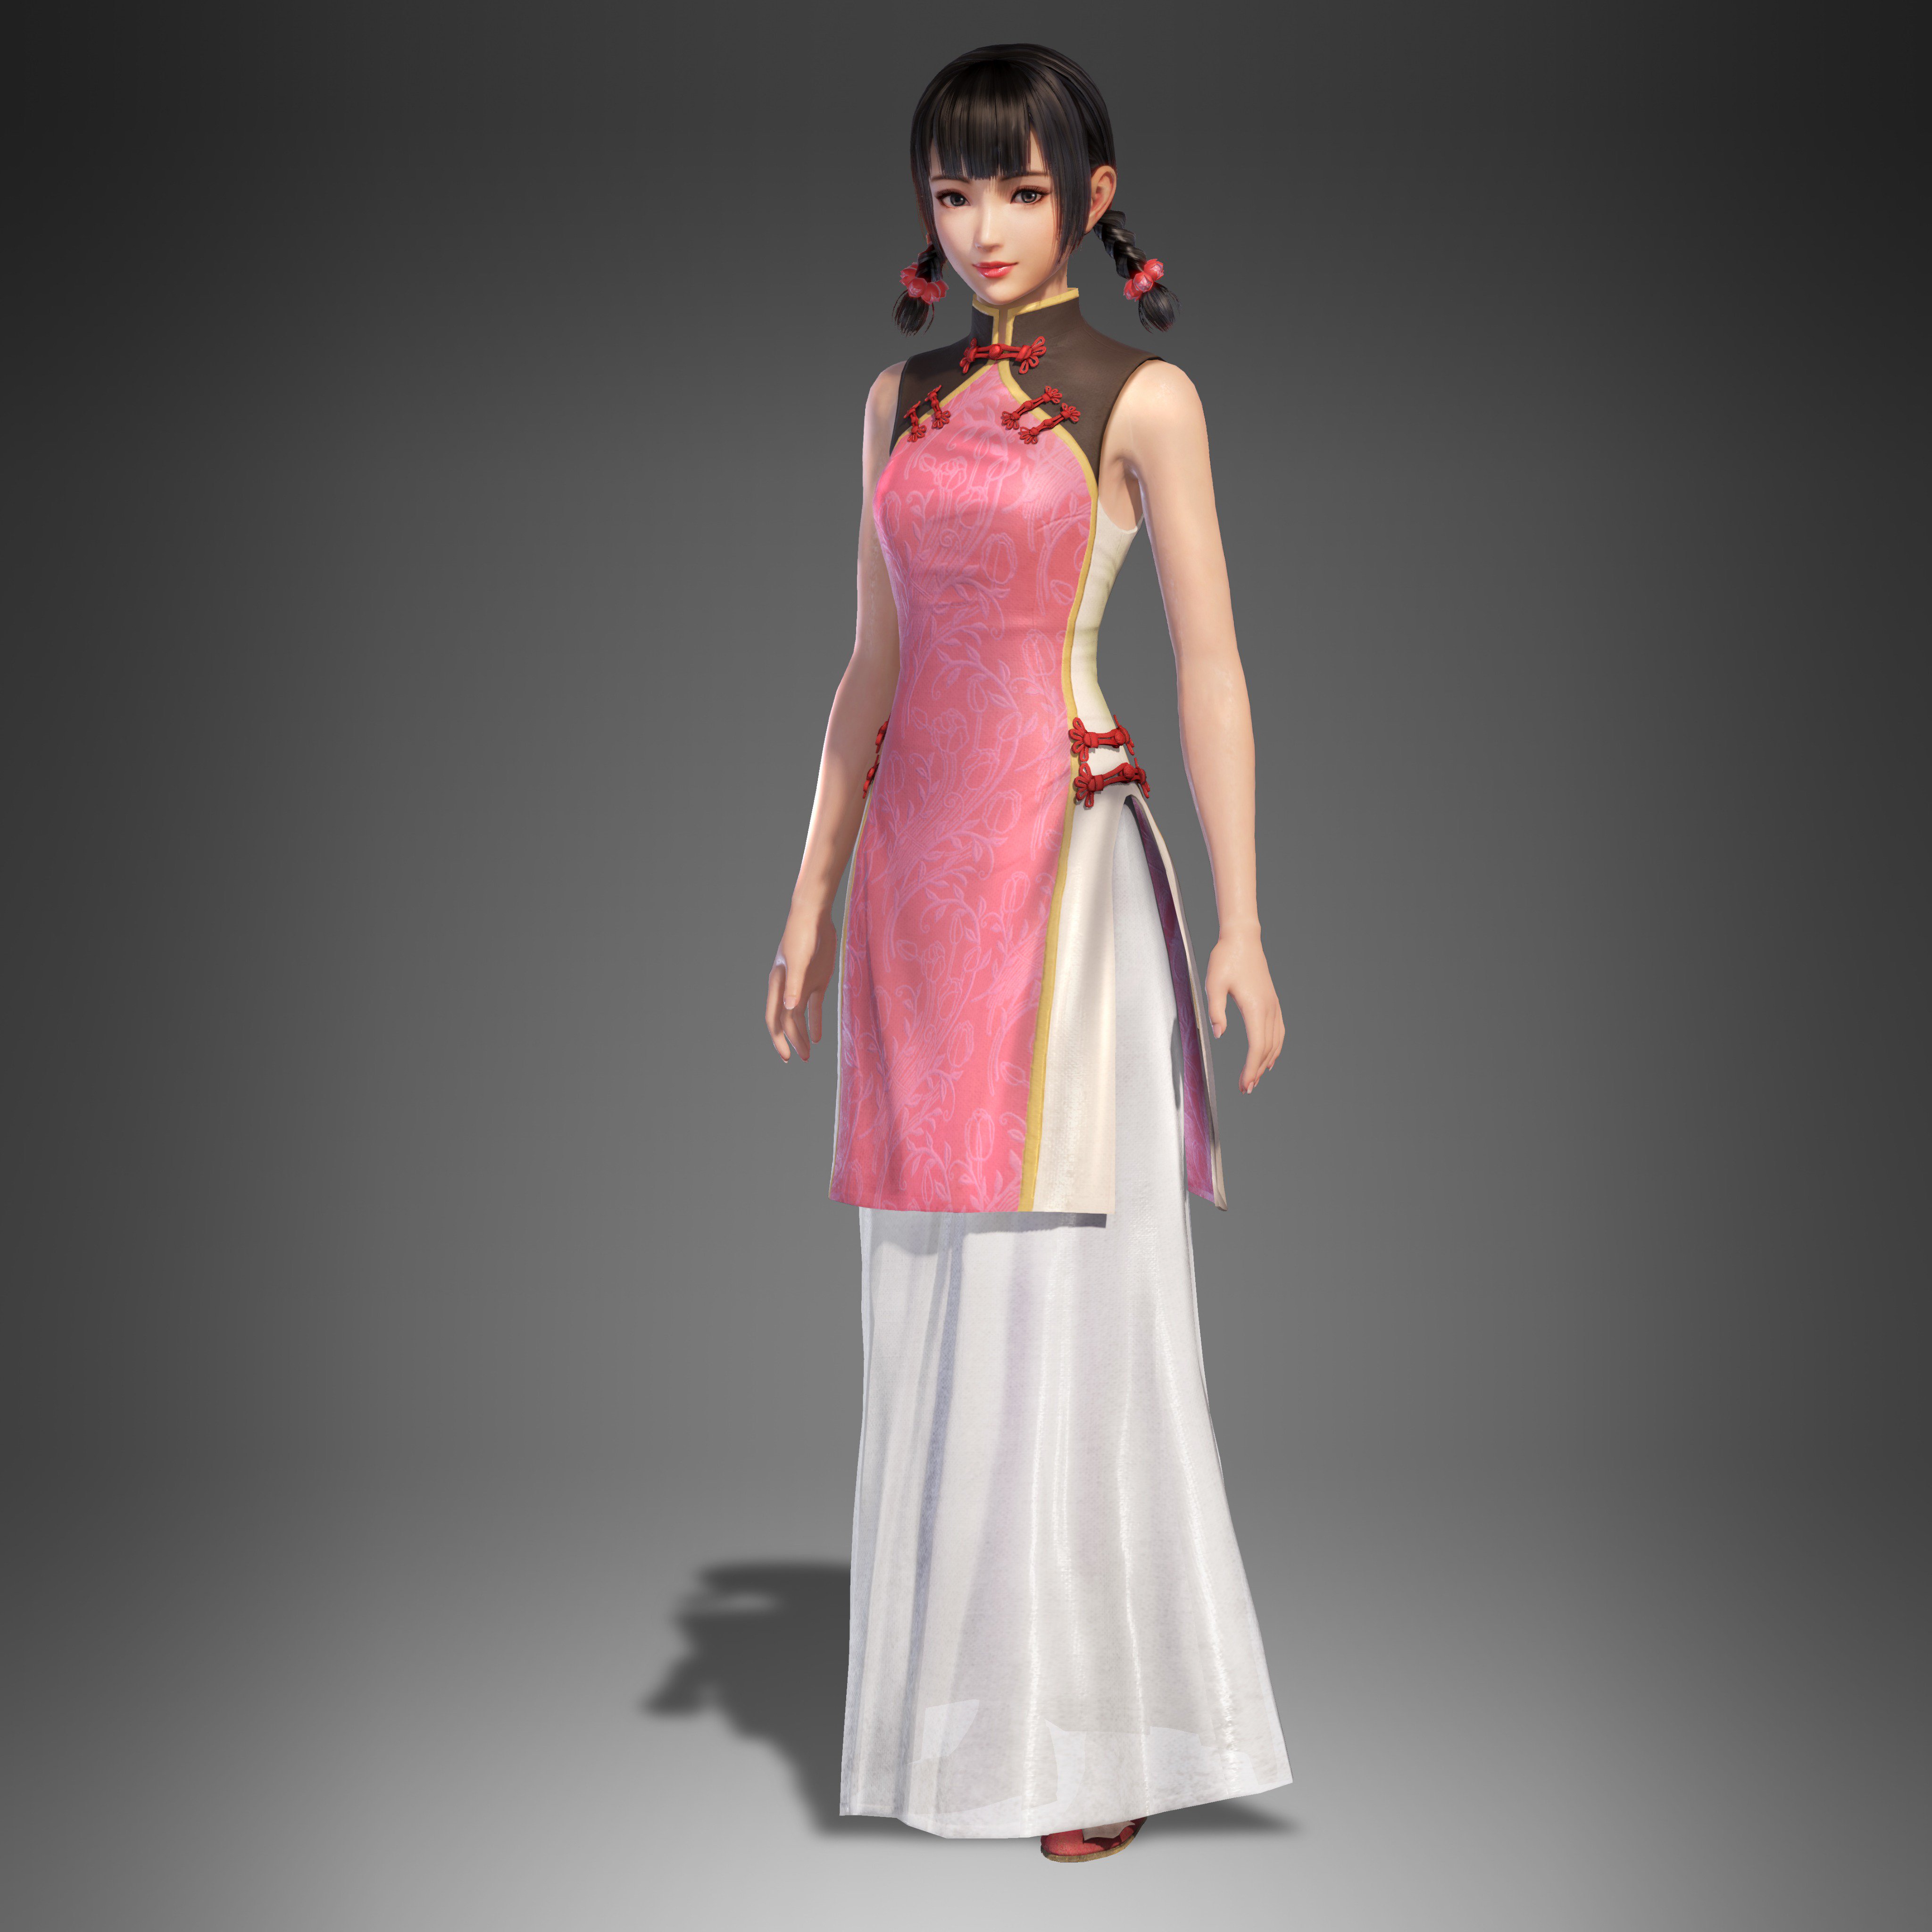 https://static.wikia.nocookie.net/fabulous-character-kingdoms/images/9/96/DW9_Daqiao_Informal_4096px.jpg/revision/latest?cb=20220213041426